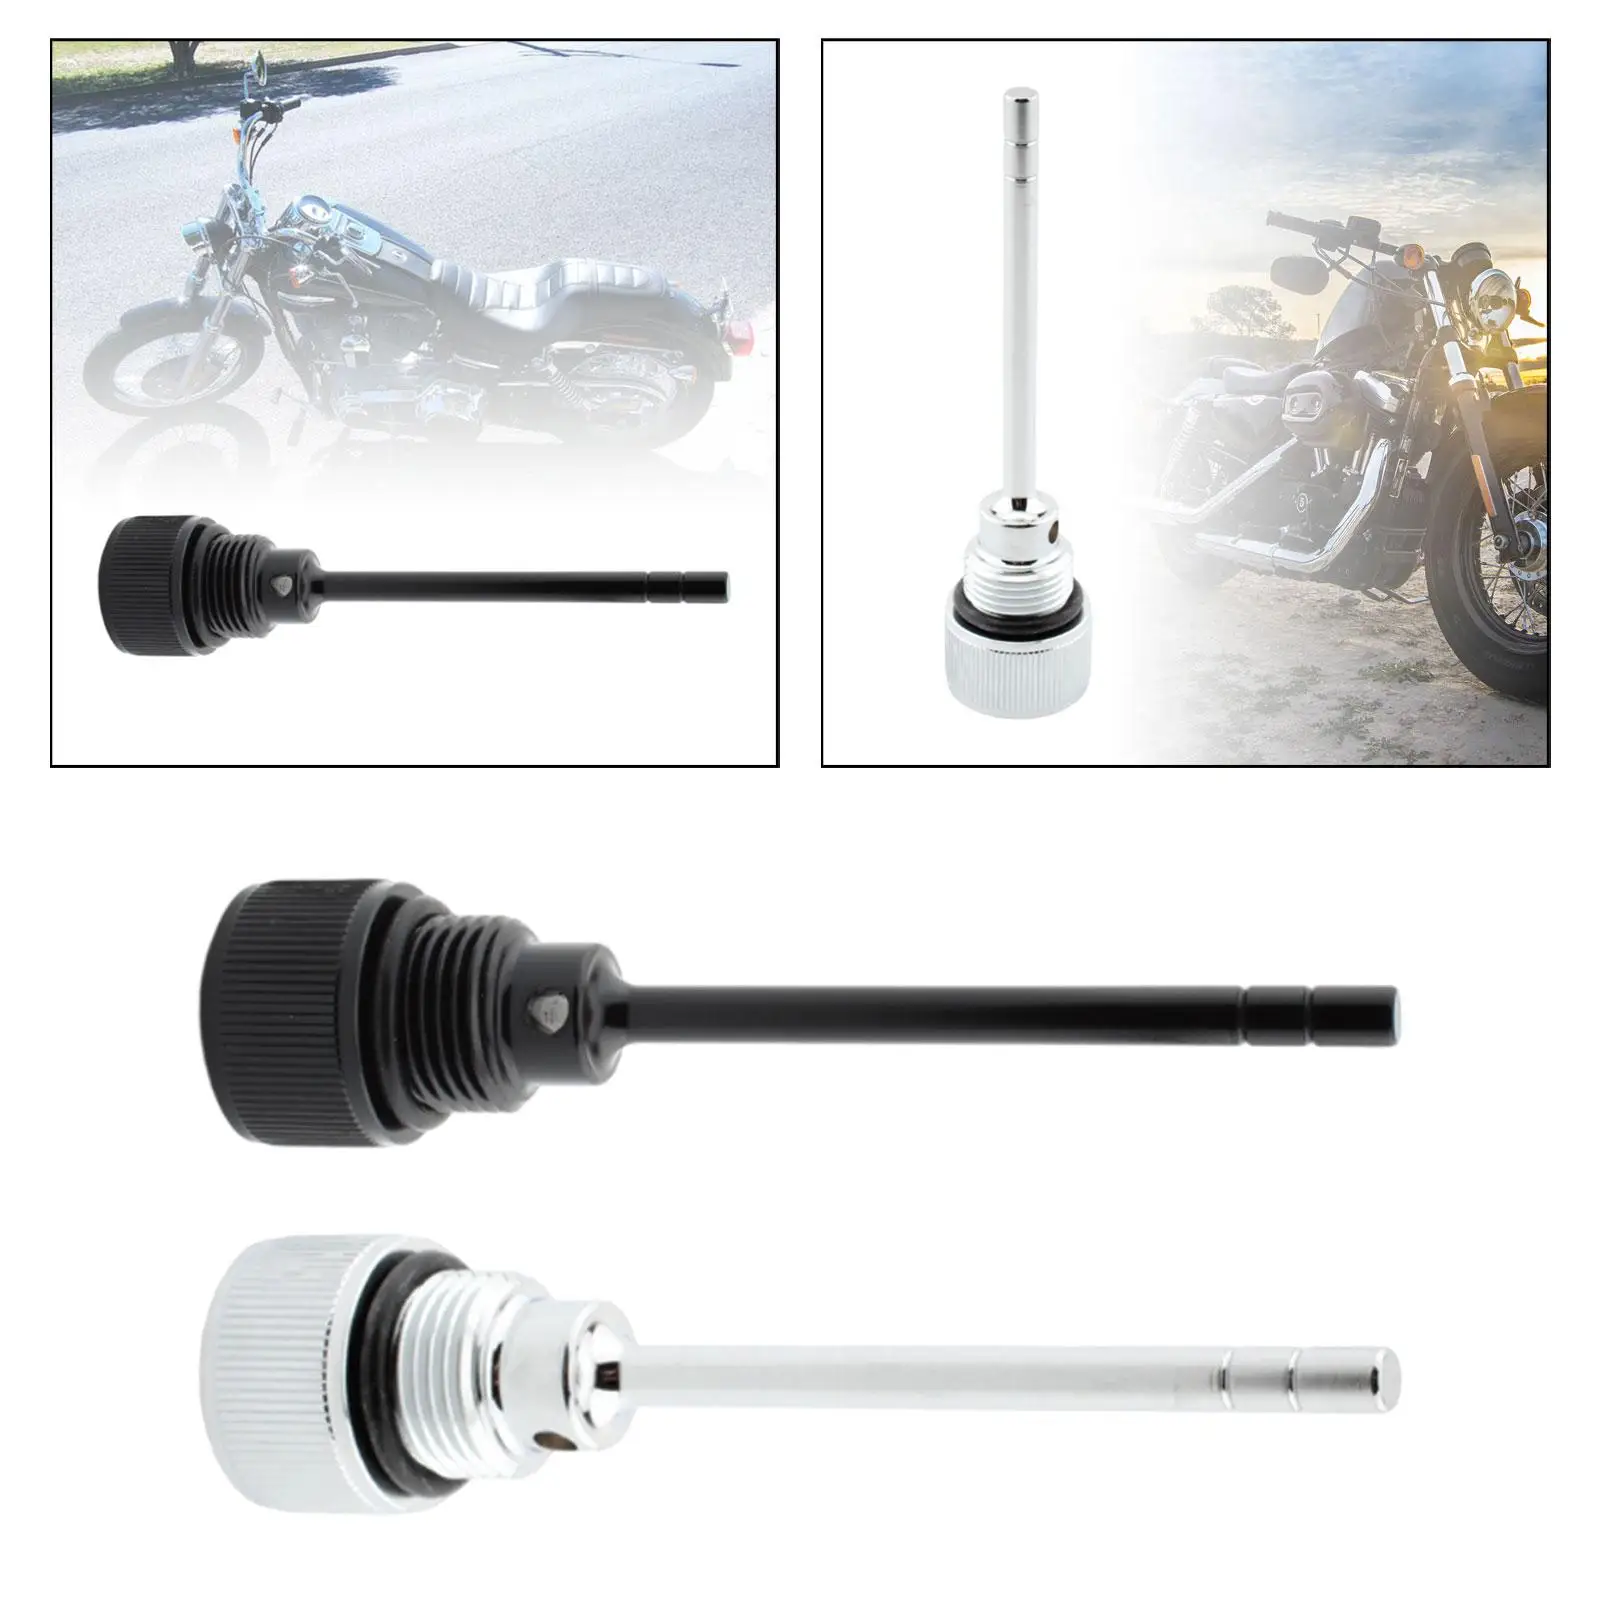 Transmission Oil Fill Plug Dipstick Direct Replaces for Fxs Flstfbs